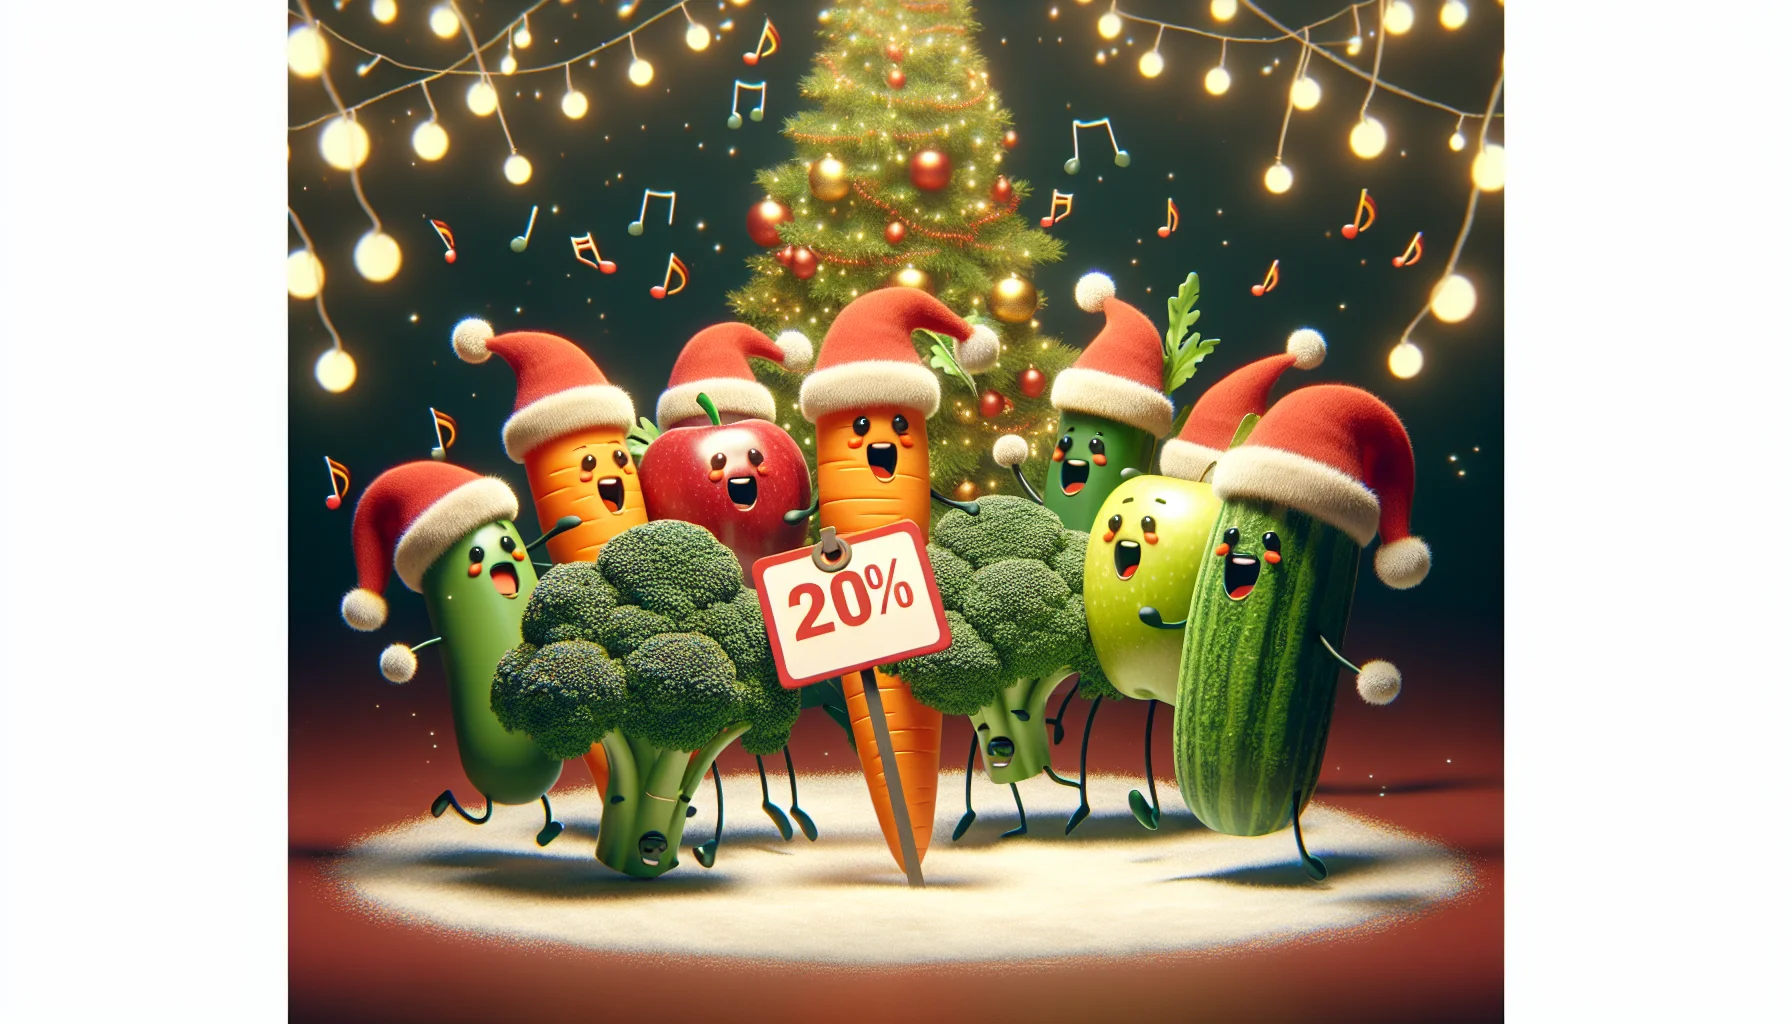 A playful and comical Christmas animation. In the animation, a group of carrots, apples, and broccoli characters are adorned with Santa hats and they are dancing joyously around a discounted price tag under a festive, twinkling Christmas tree. The foods sway and spin, singing a catchy tune about the benefits and joys of eating healthy for less, encouraging onlookers to join in their jubilations for well-priced nutritious foods during the holiday season.